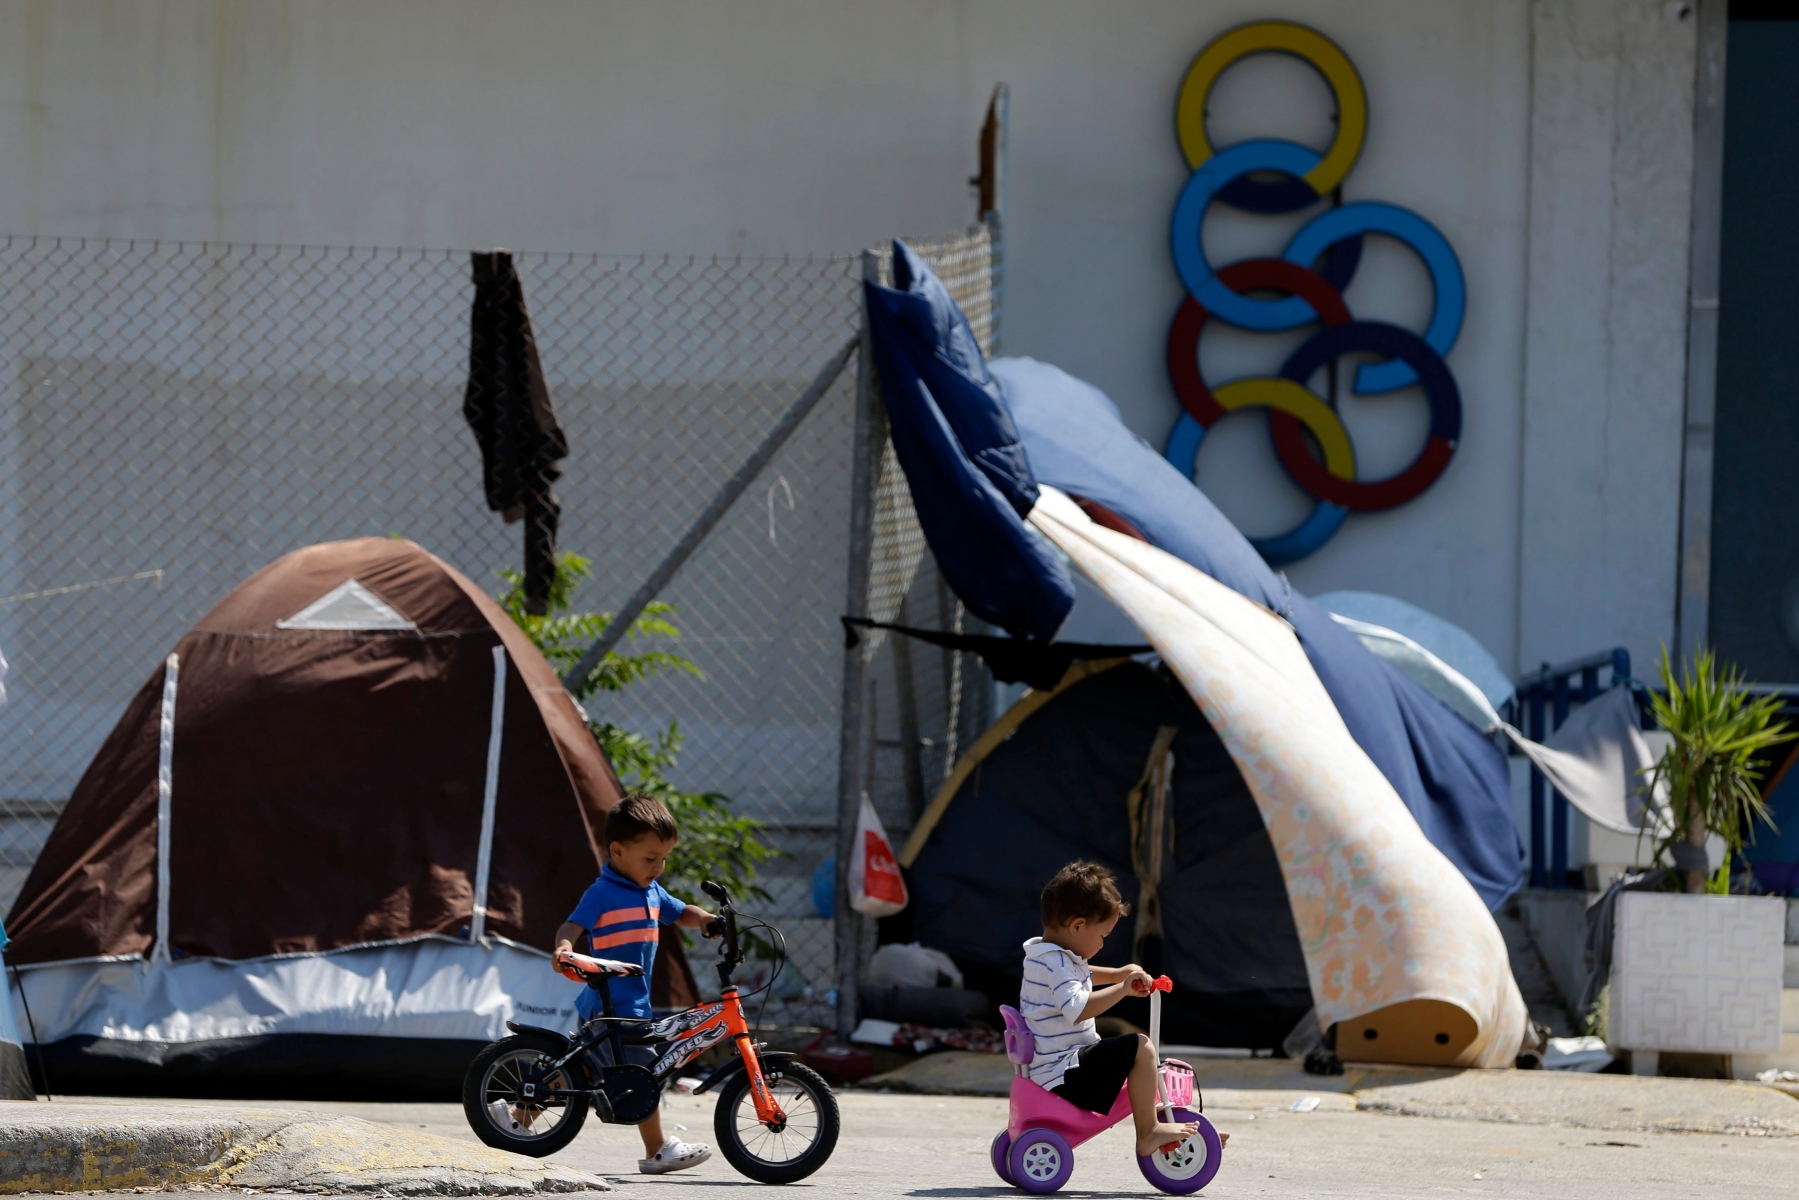 Children play next to a logo of Olympic Air at the old international airport, which is used as a shelter for over 2,800 refugees and migrants, in southern Athens, on Thursday, Aug. 4, 2016. Daily arrivals by migrants and refugees at Greek islands near the Turkish coast have remained low since the July 15 coup attempt, but about 57,000 people remain stranded in Greece, most in army-built camps on the mainland. (AP Photo/Thanassis Stavrakis) Greece Migrants